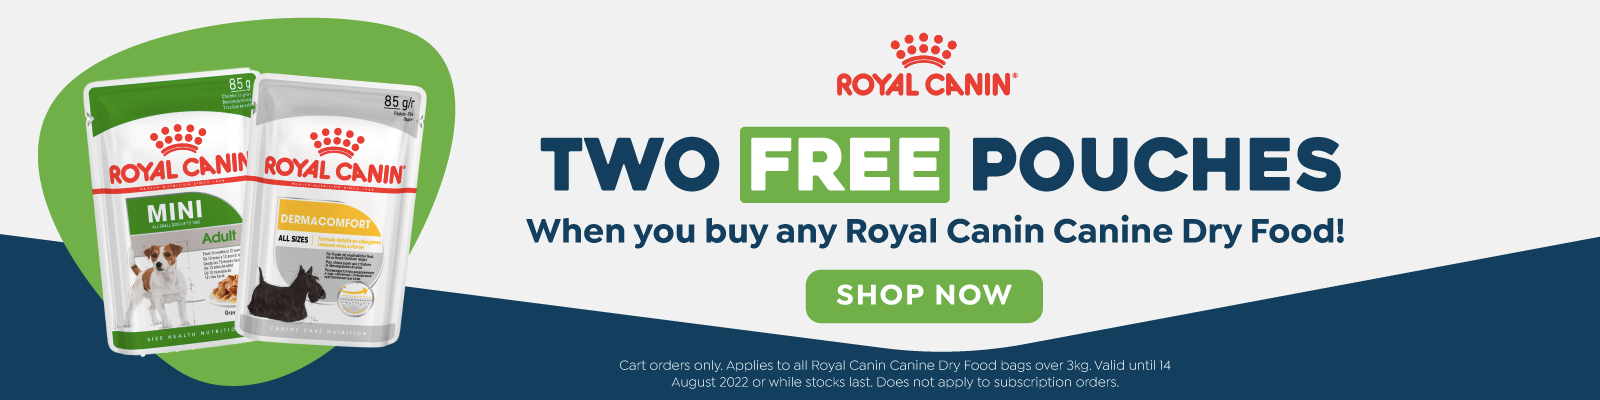 Royal Canin FREE Pouches - Aug 2022